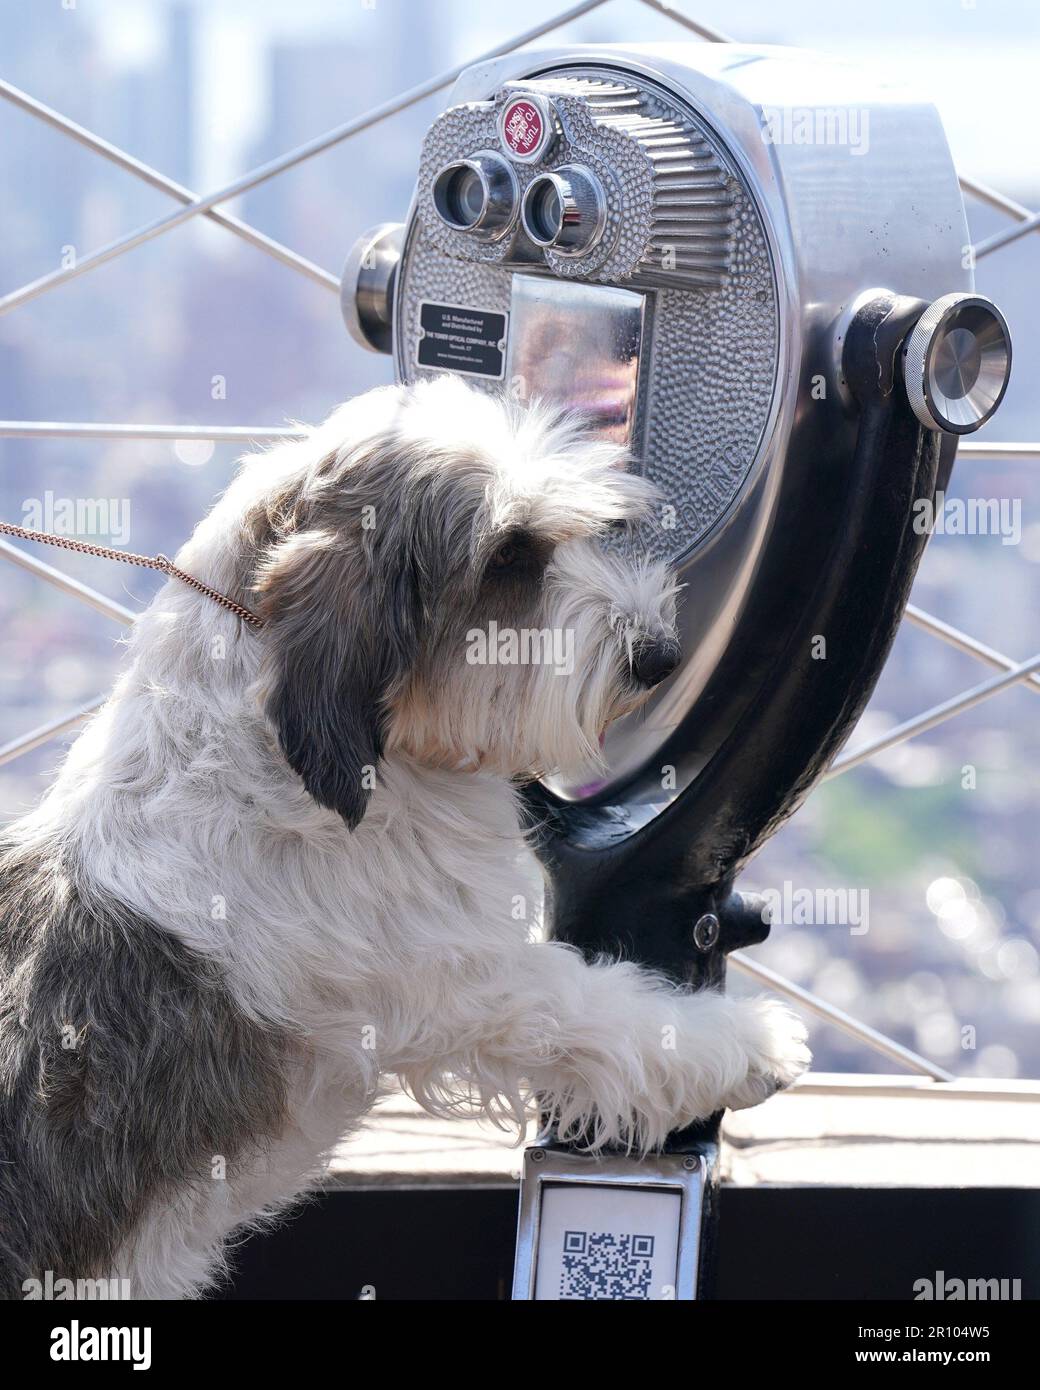 New York, NY, USA. 10th May, 2023. Buddy Holly at a public appearance for Empire State Building Hosts Buddy Holly The Petit Basset Griffon Vendeen, Best In Show Winner Of The 147th Westminster Kennel Dog Club Show, The Empire State Building, New York, NY May 10, 2023. Credit: Kristin Callahan/Everett Collection/Alamy Live News Stock Photo